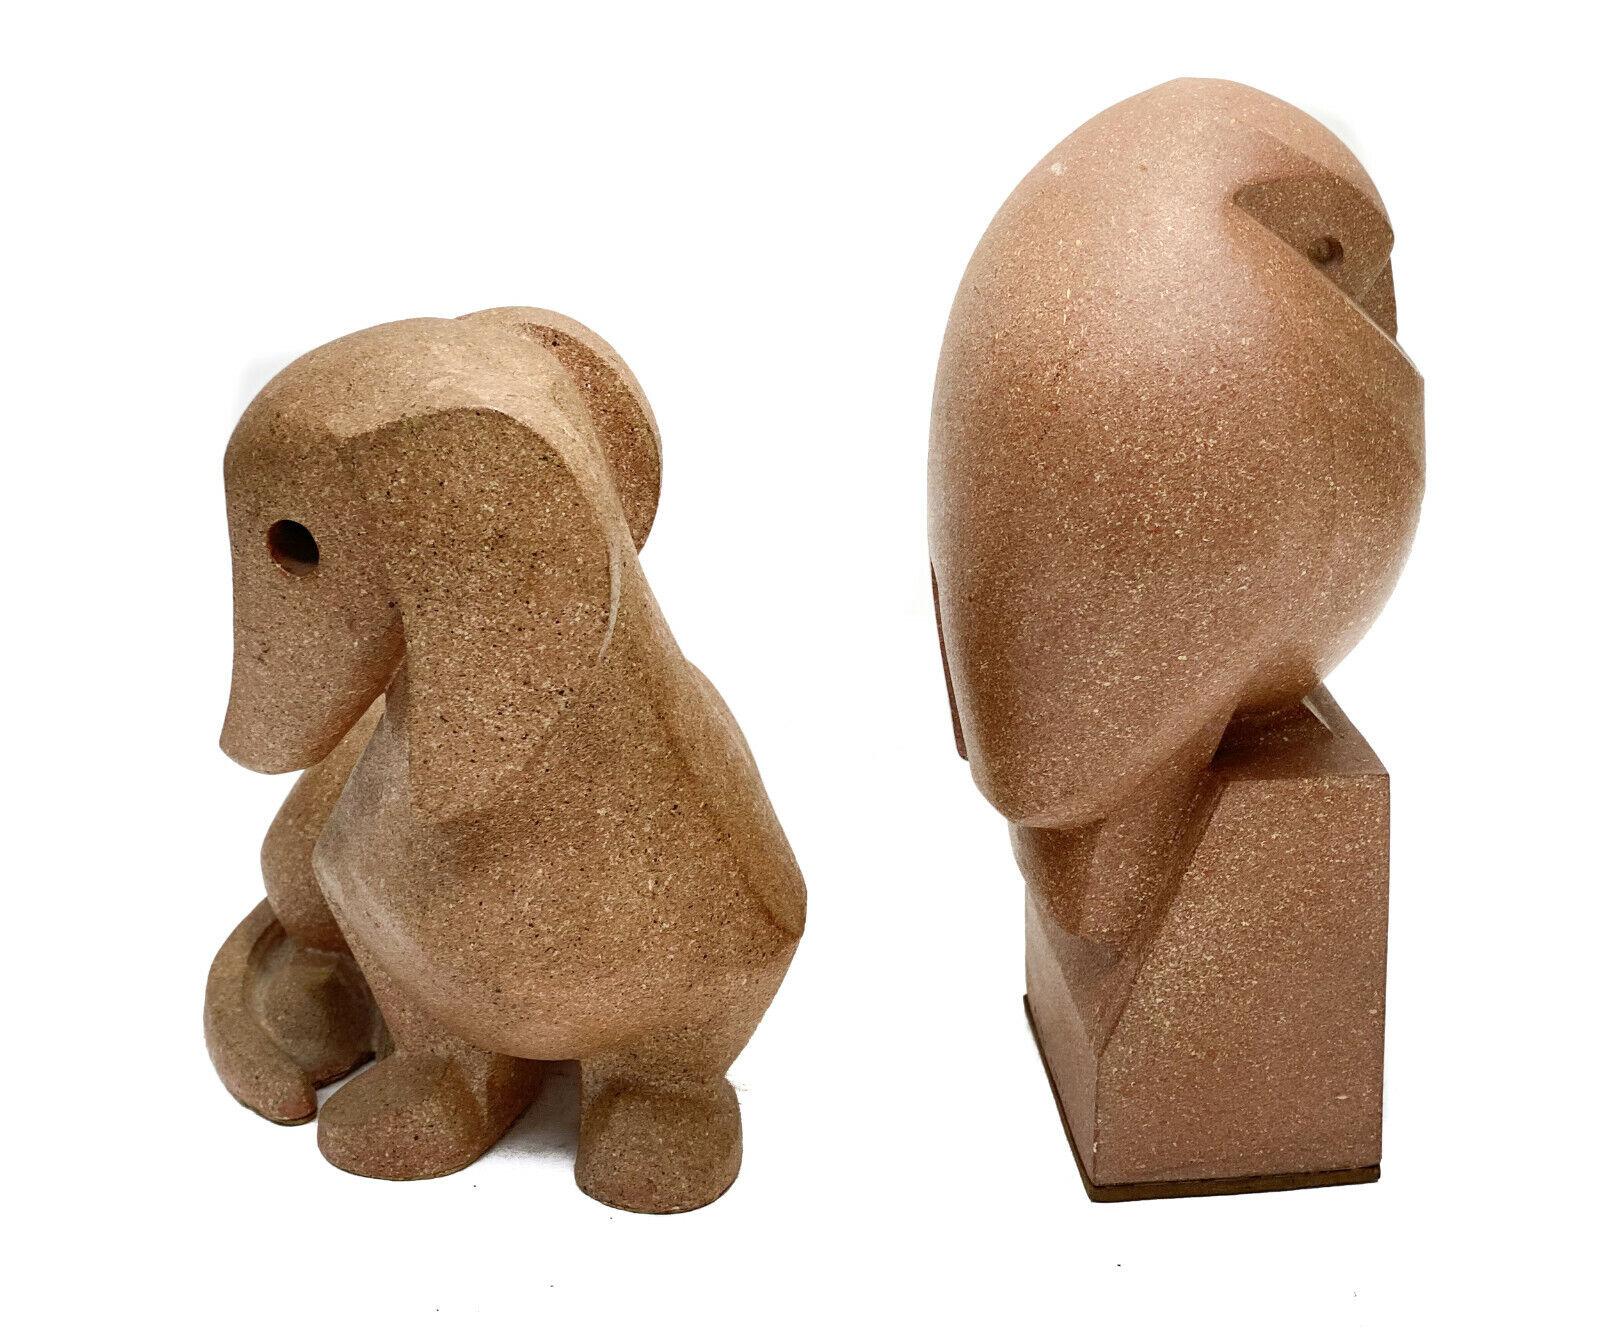 Ceramic dog & owl figurines, signed, by Mimi Murphey

The figurines are a modernist take on a dog and owl. Artist signed Mimi Murphey to the underside base of the dog, and dated to 1956.

Additional information:
Bird Species: Owl 
Type: